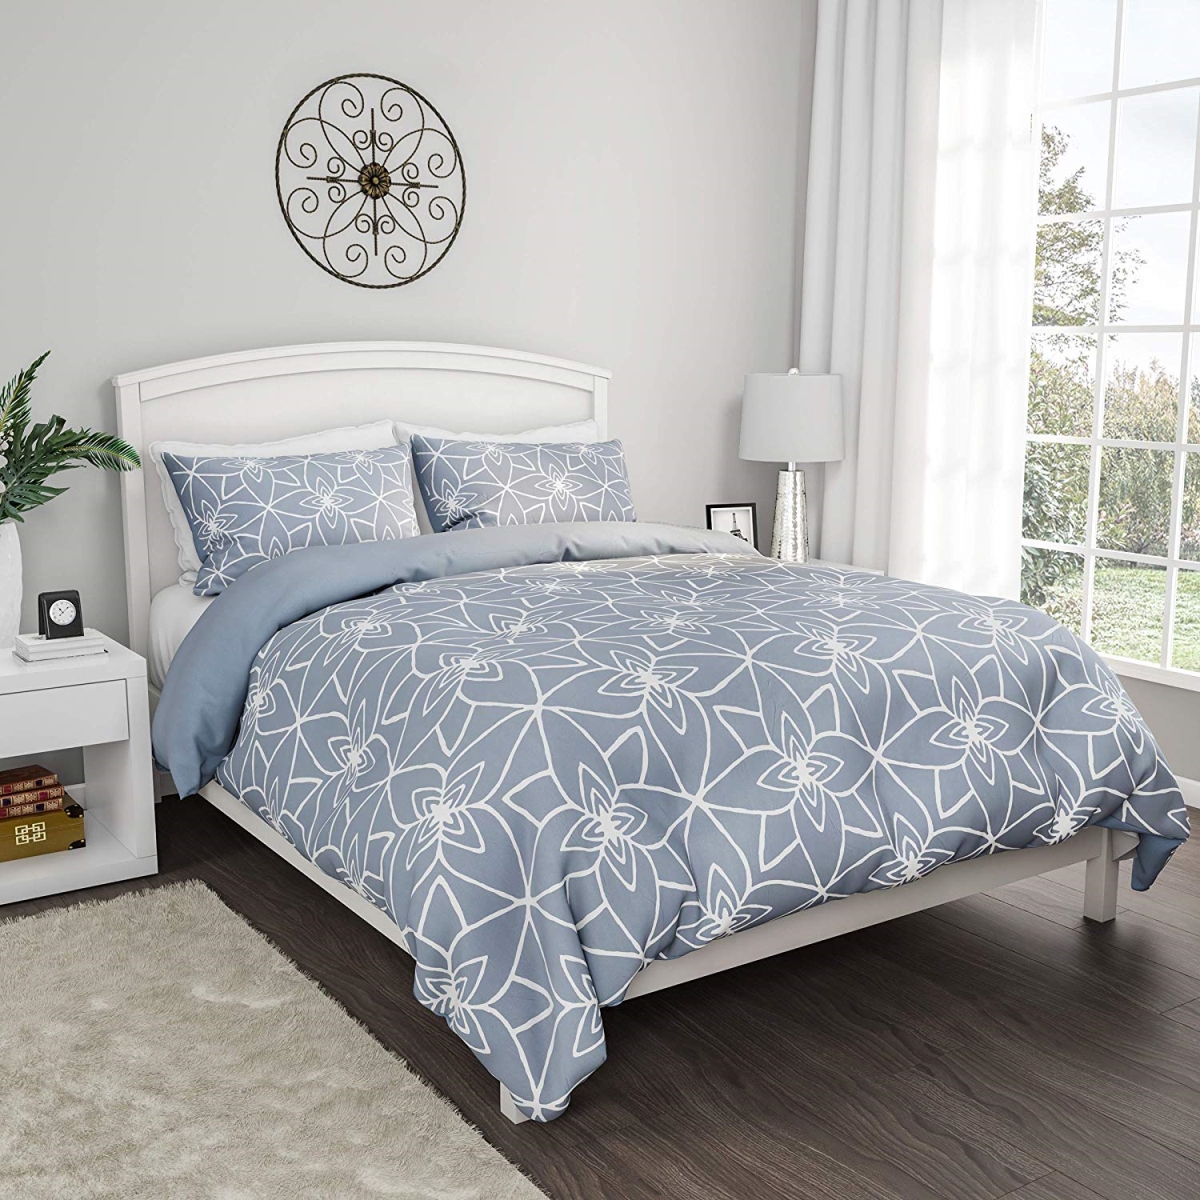 66a-94489 Hypoallergenic With Geometric Pattern Reversible 2 Shams, Blue